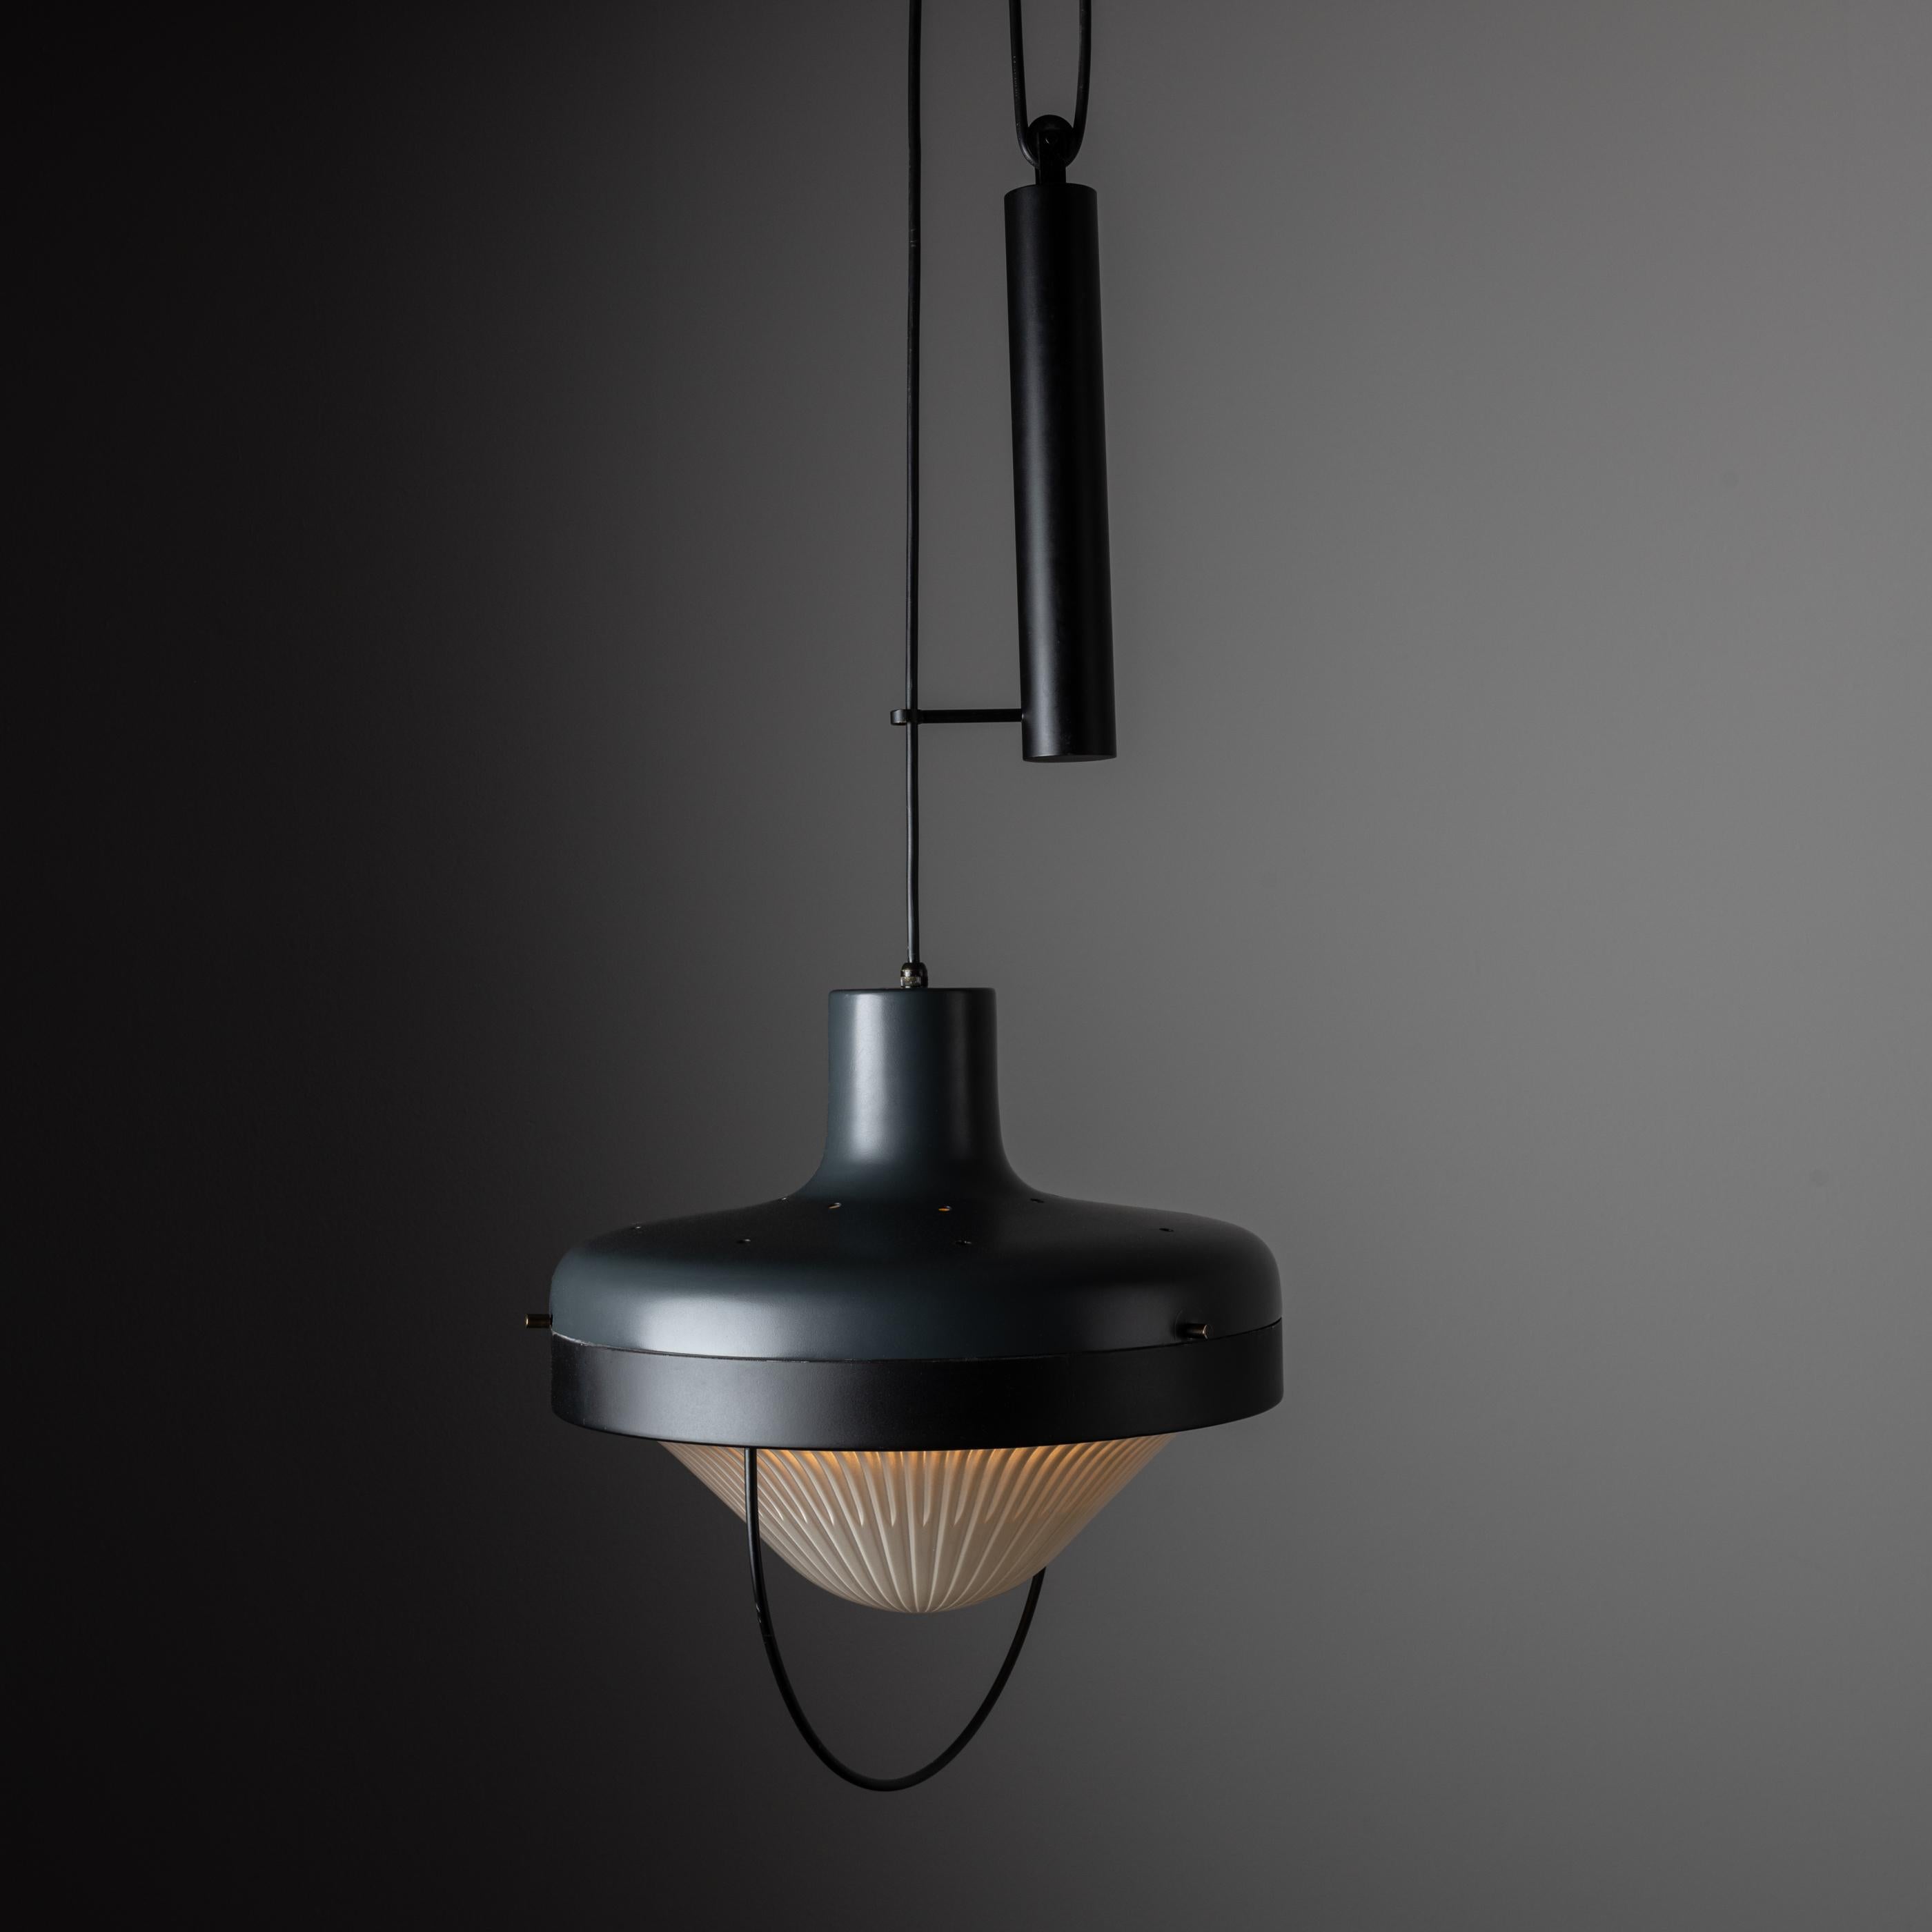 Pulley ceiling light by Greco. Manufactured and designed in Italy circa 1950. Circular matte finish ceiling fixture with beveled dew drop glass diffuser. Includes adjustable pulley system for desired height. We recommend using one E27 40W maximum